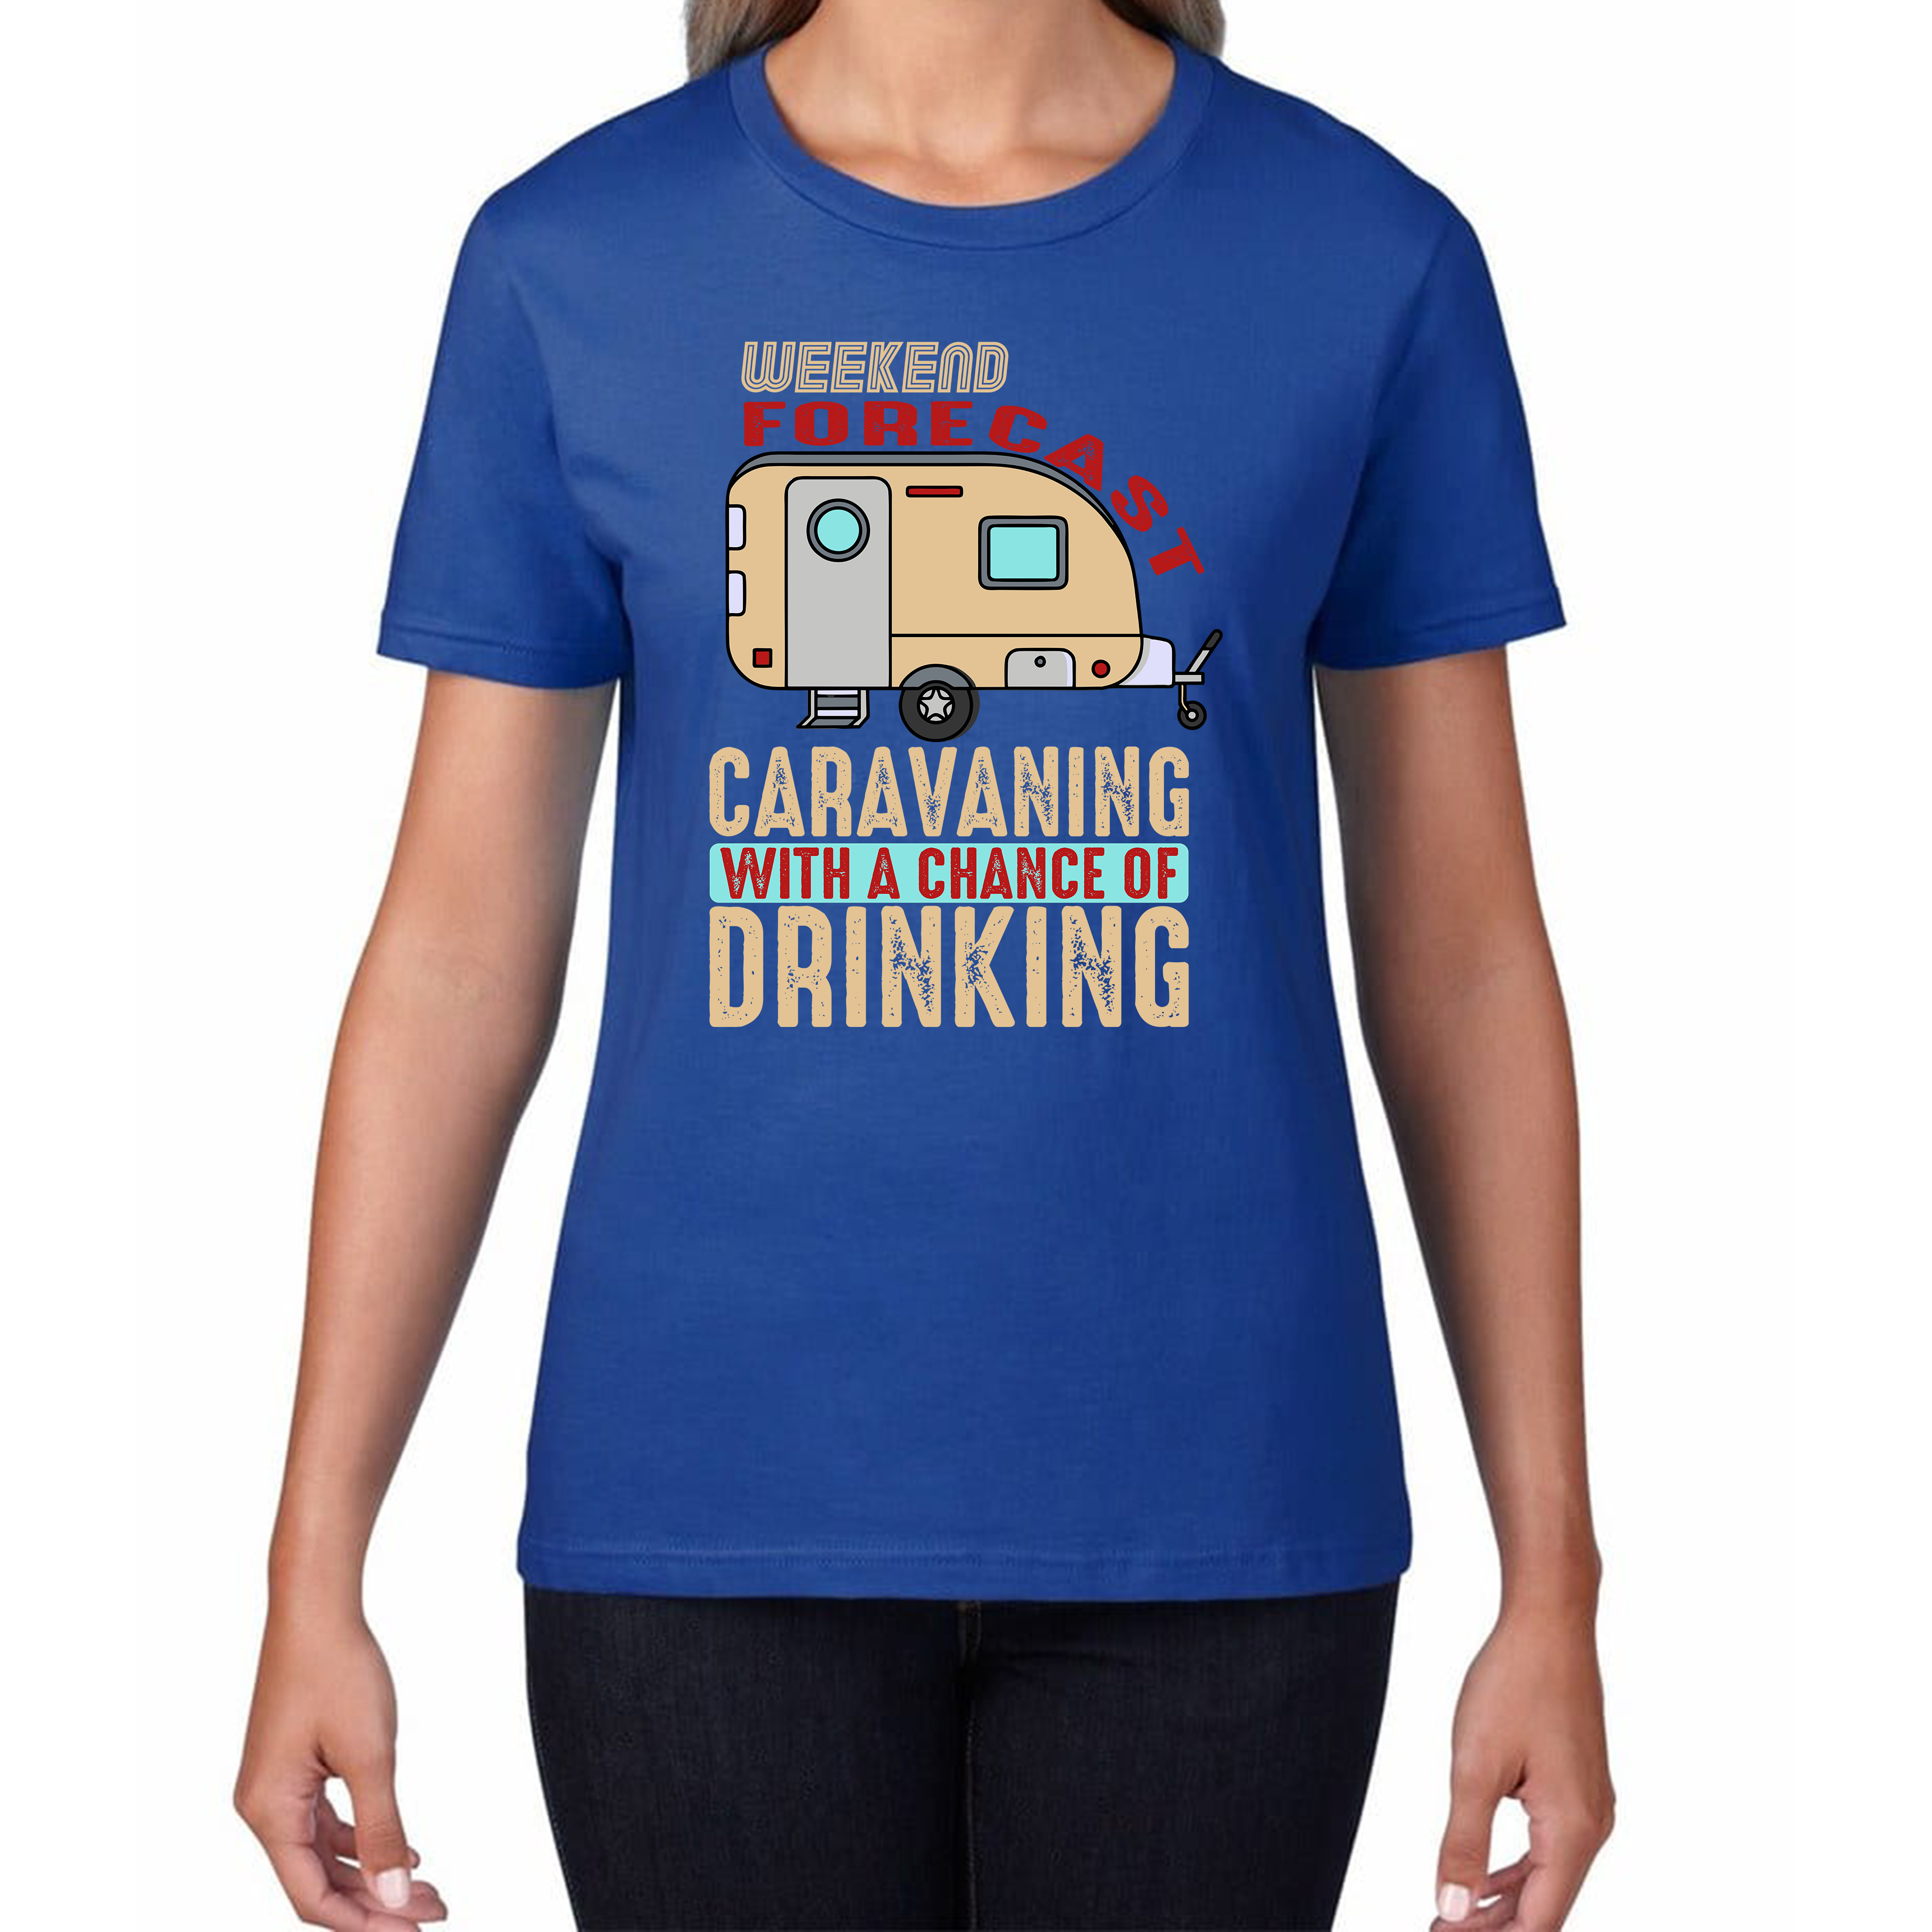 Weekend Forecast Caravanning With A Chace Of Drinking T-Shirt Caravan Drinking Camping Gift Womens Tee Top